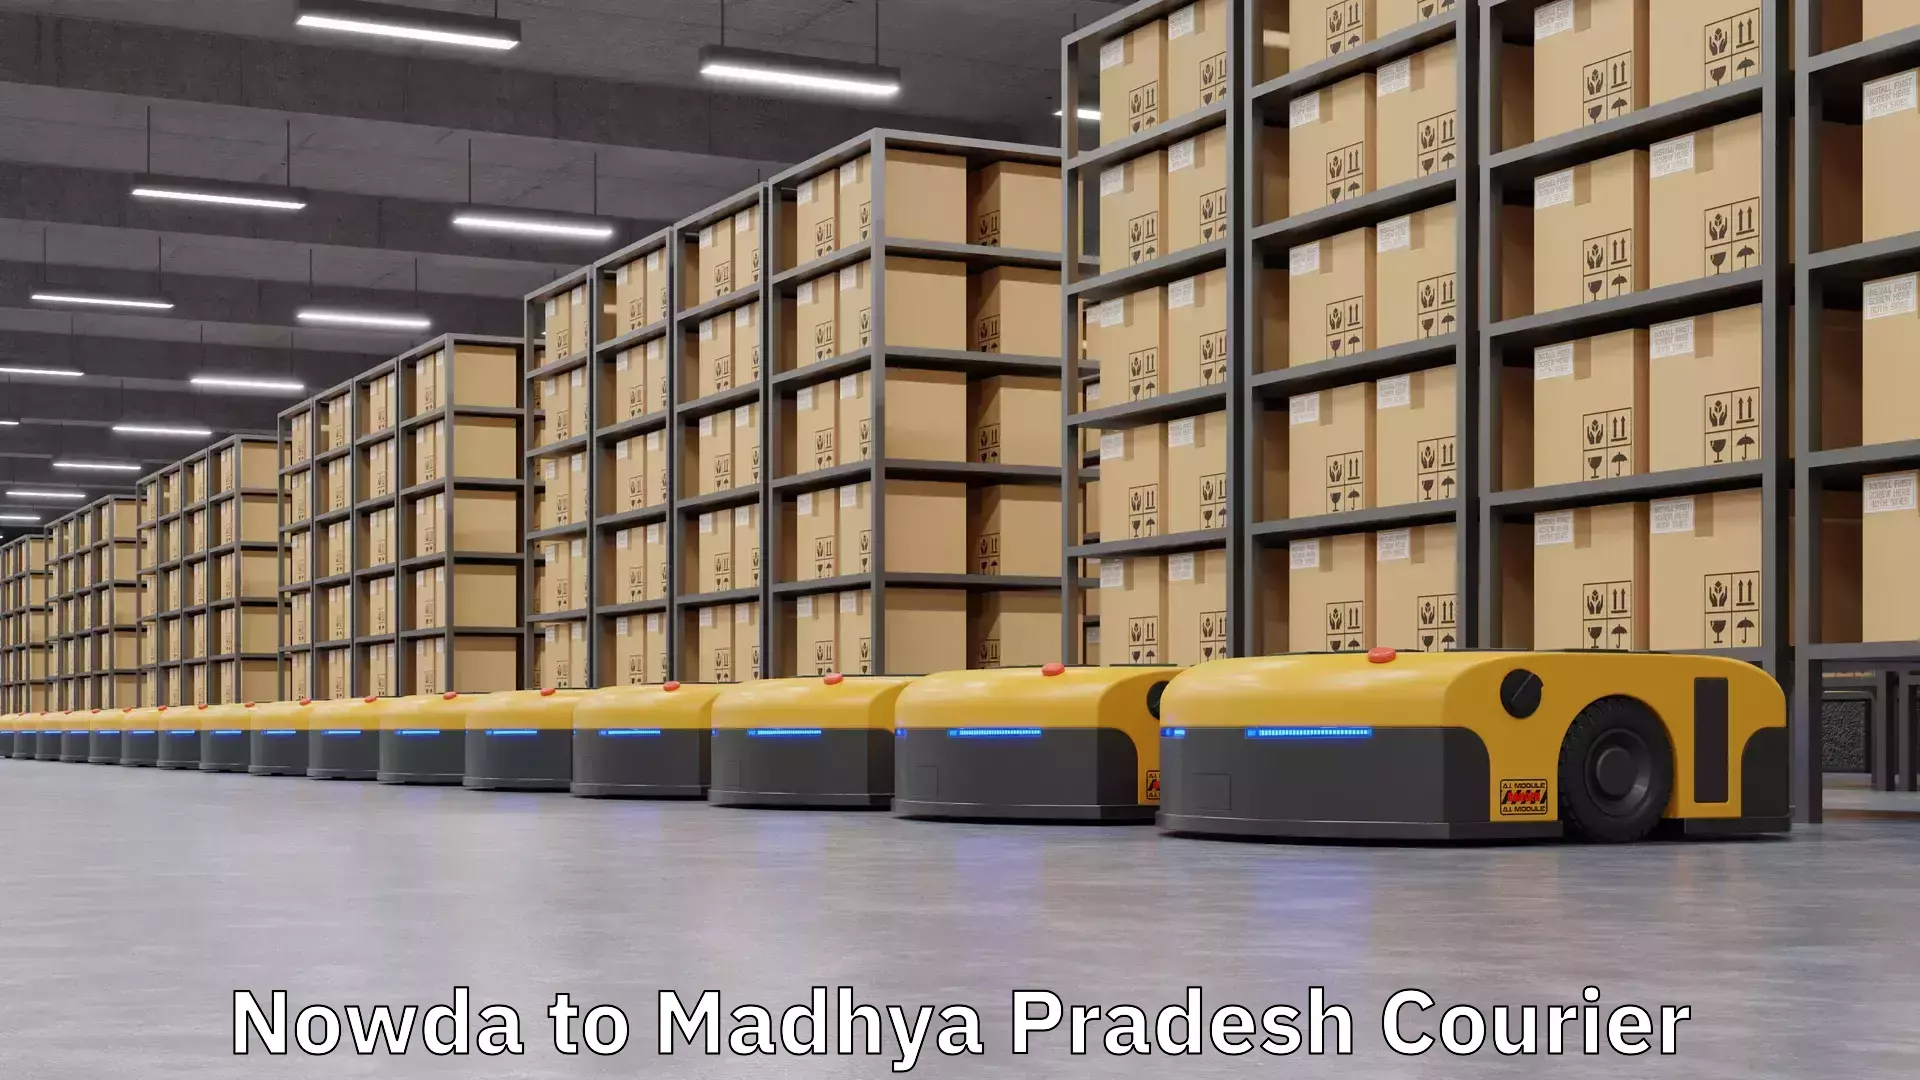 On-call courier service Nowda to Madhya Pradesh